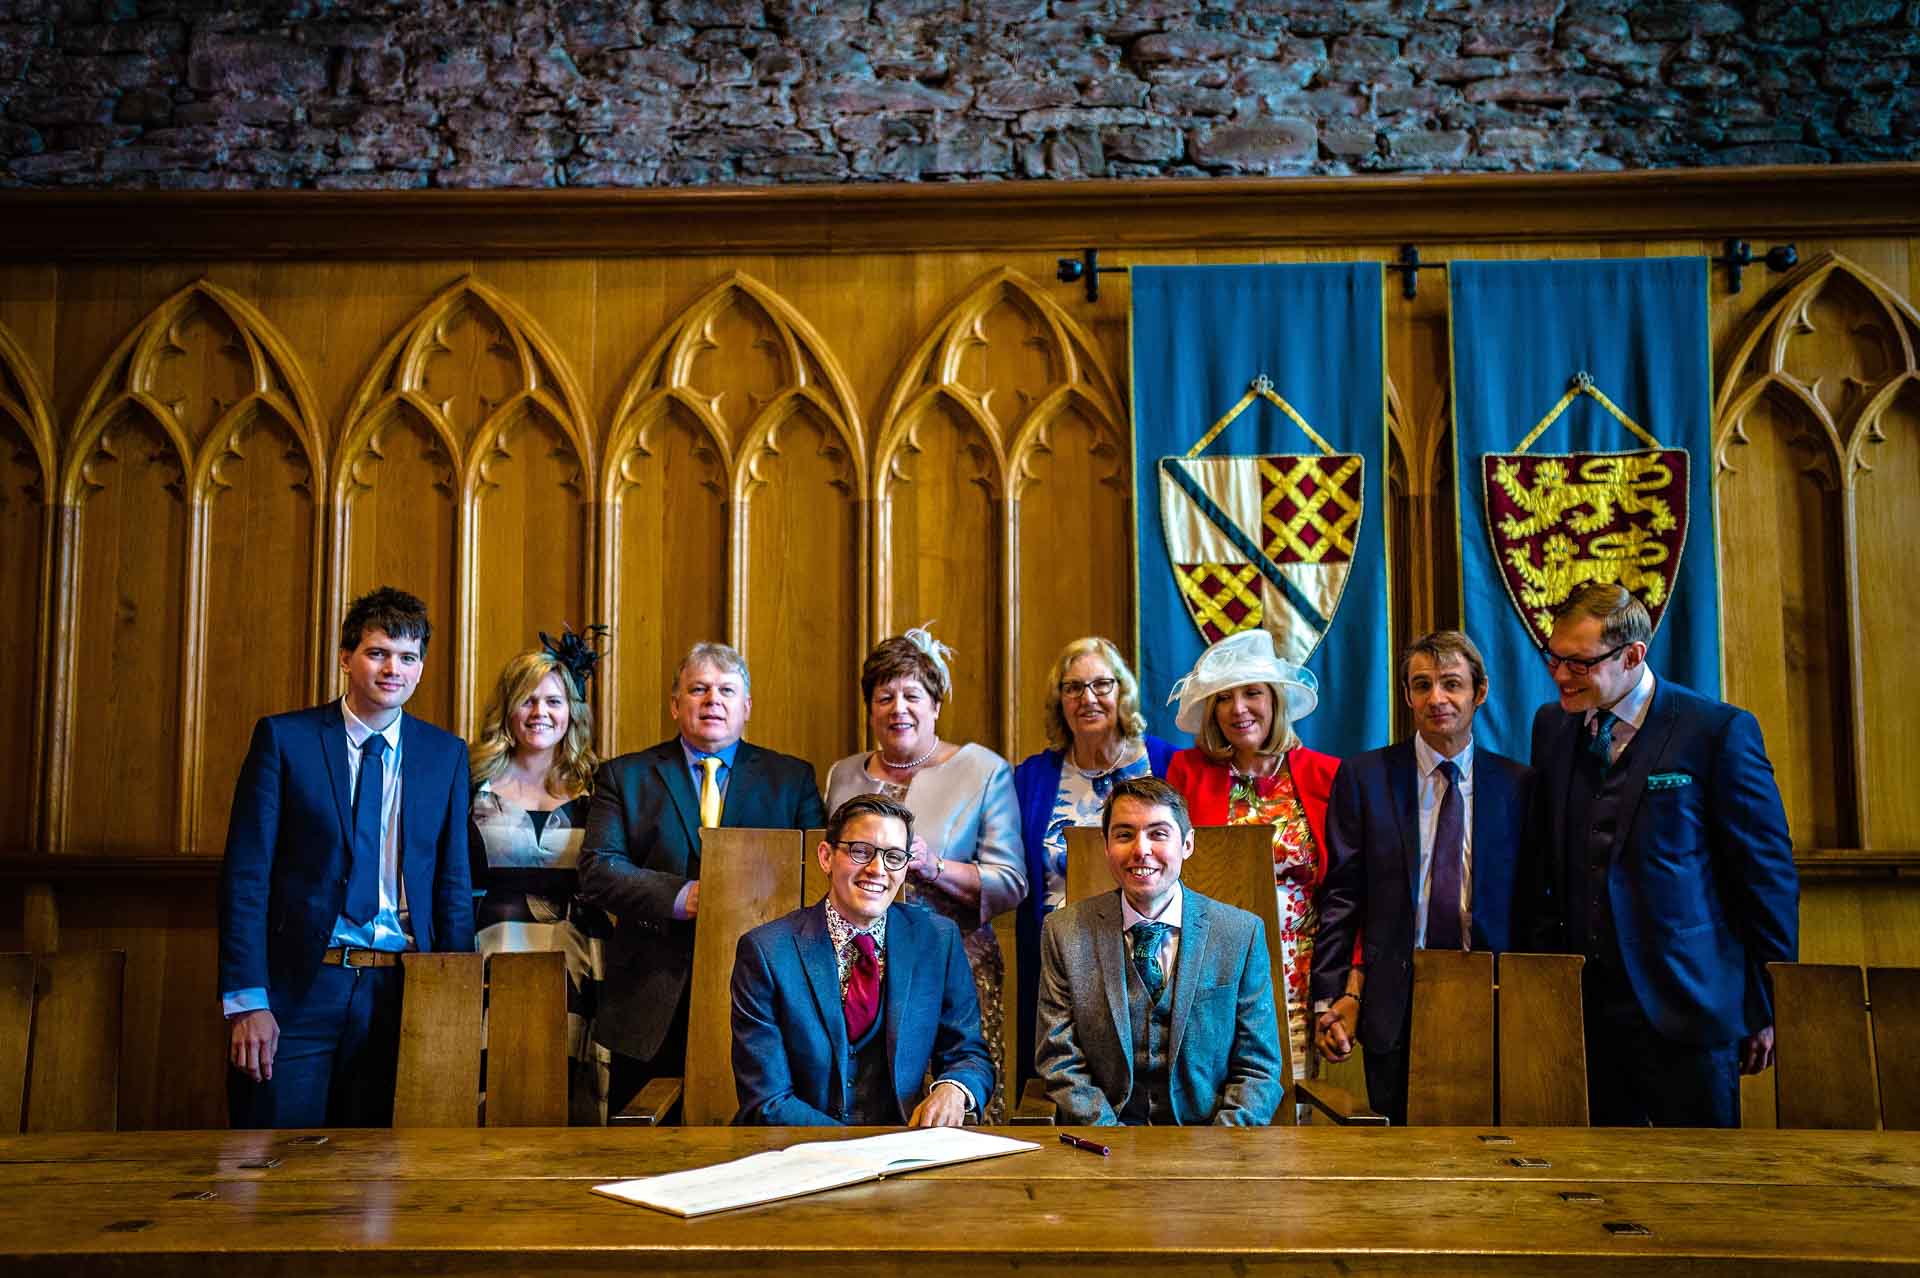 Group photo of family members at Caerphilly Castle wedding